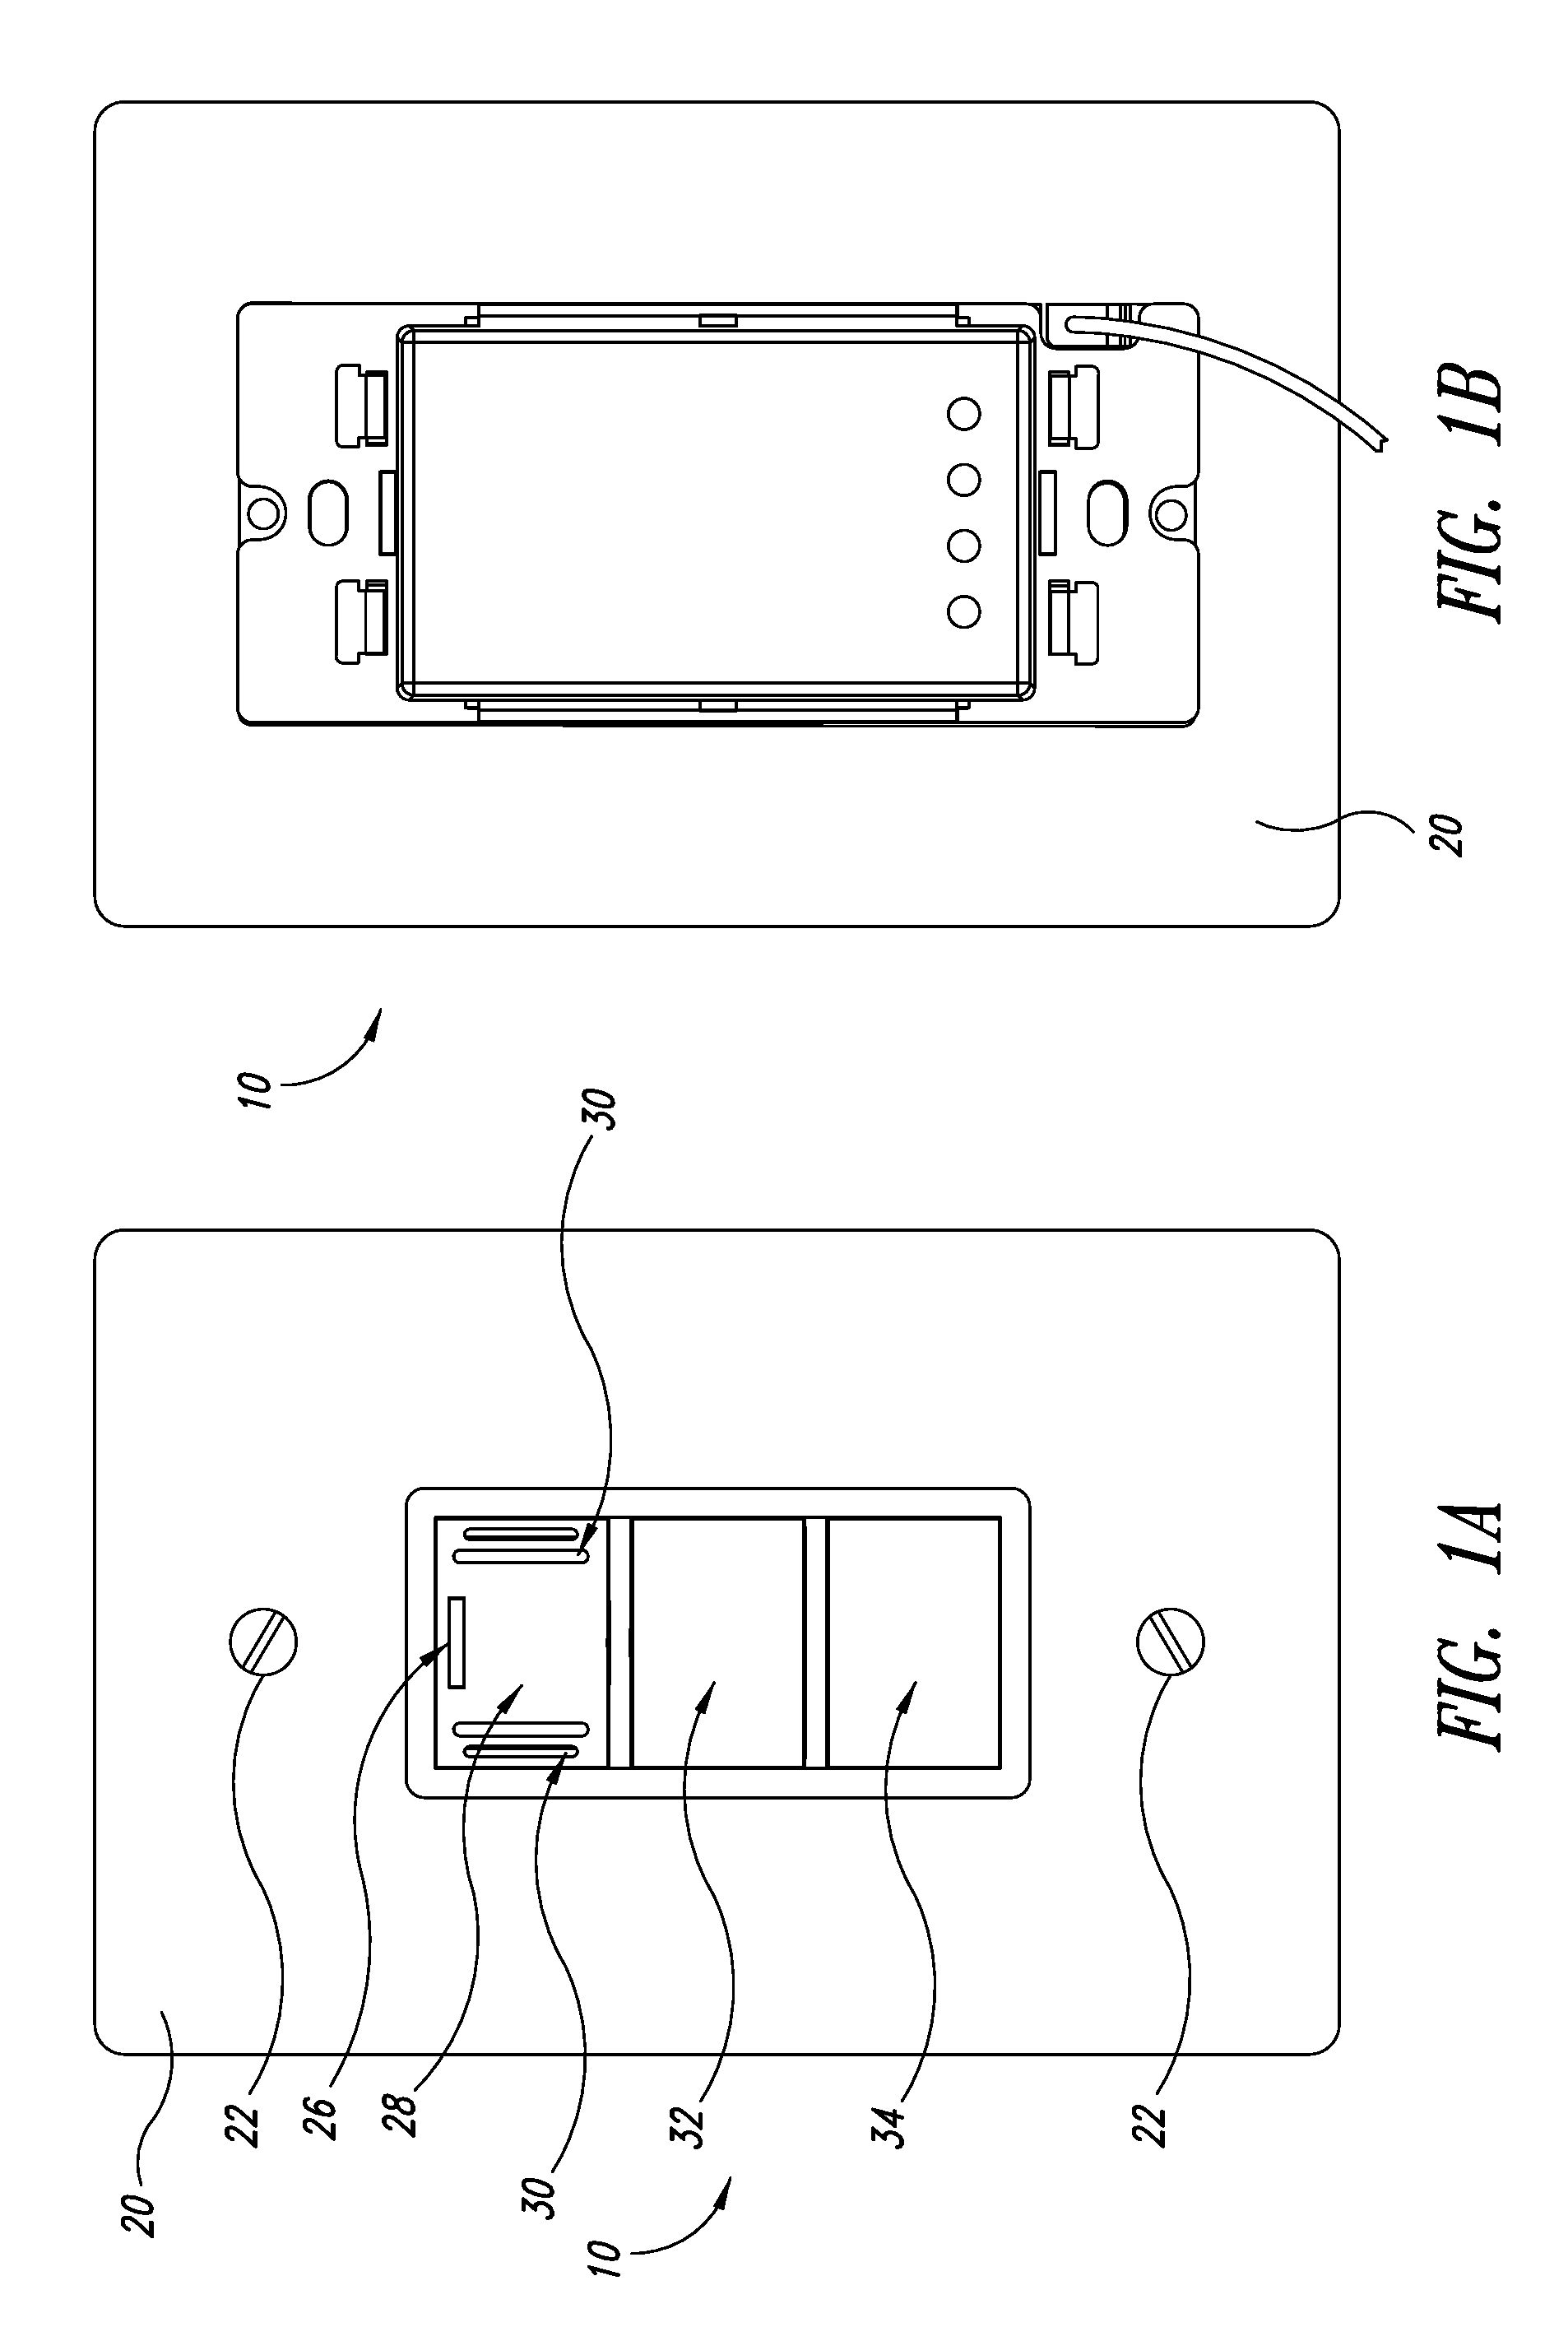 Ventilation control system and method